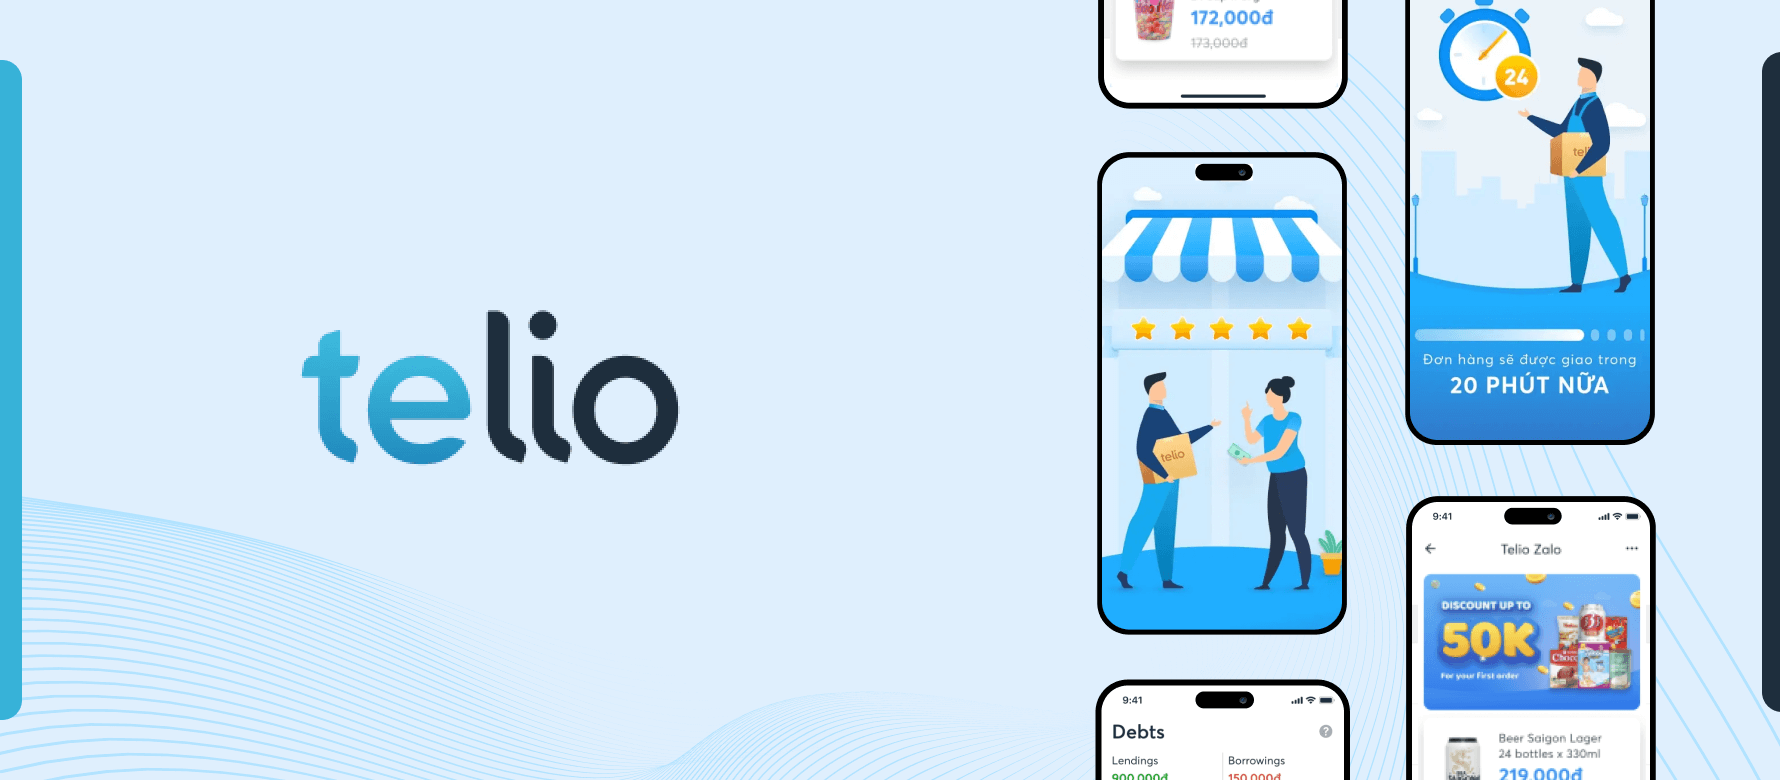 Case Study | App screen design of Telio, Vietnam’s pioneering digital E-Commerce start-up that provides B2B solutions for groceries and consumer goods.